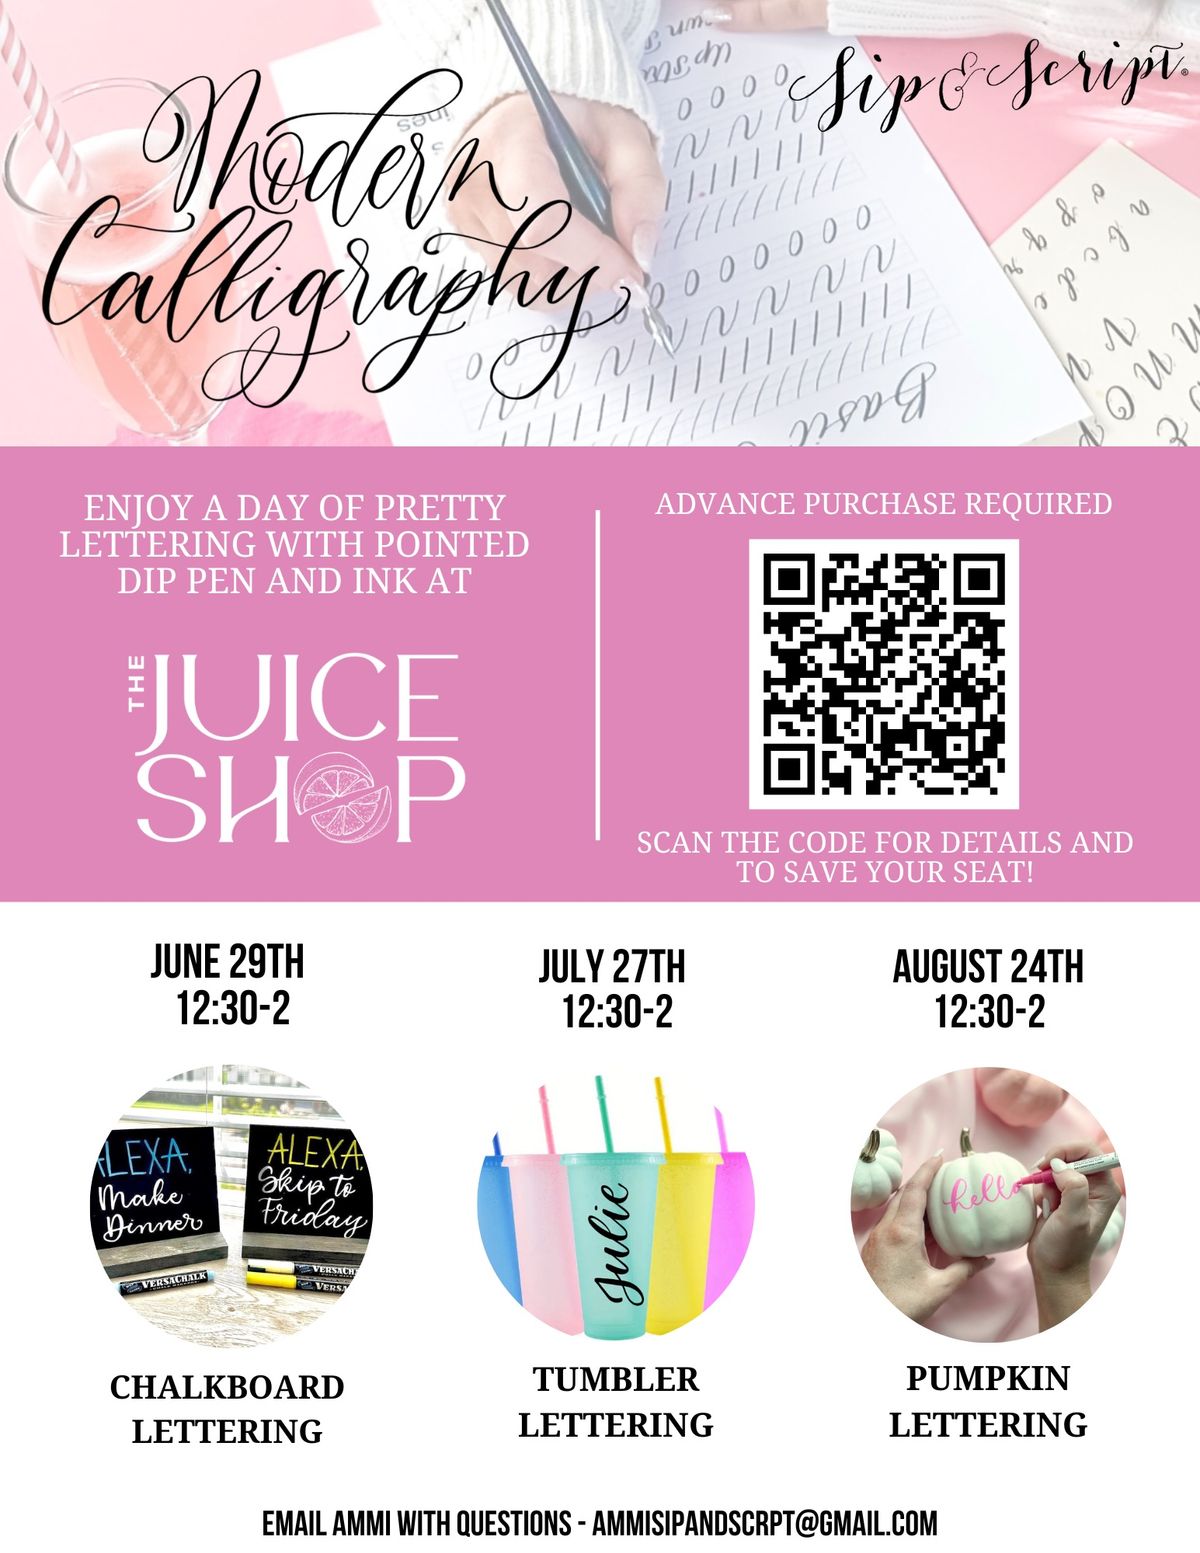 Modern Calligraphy & Pumpkin Lettering Class for Beginners @ The Juice Shop 